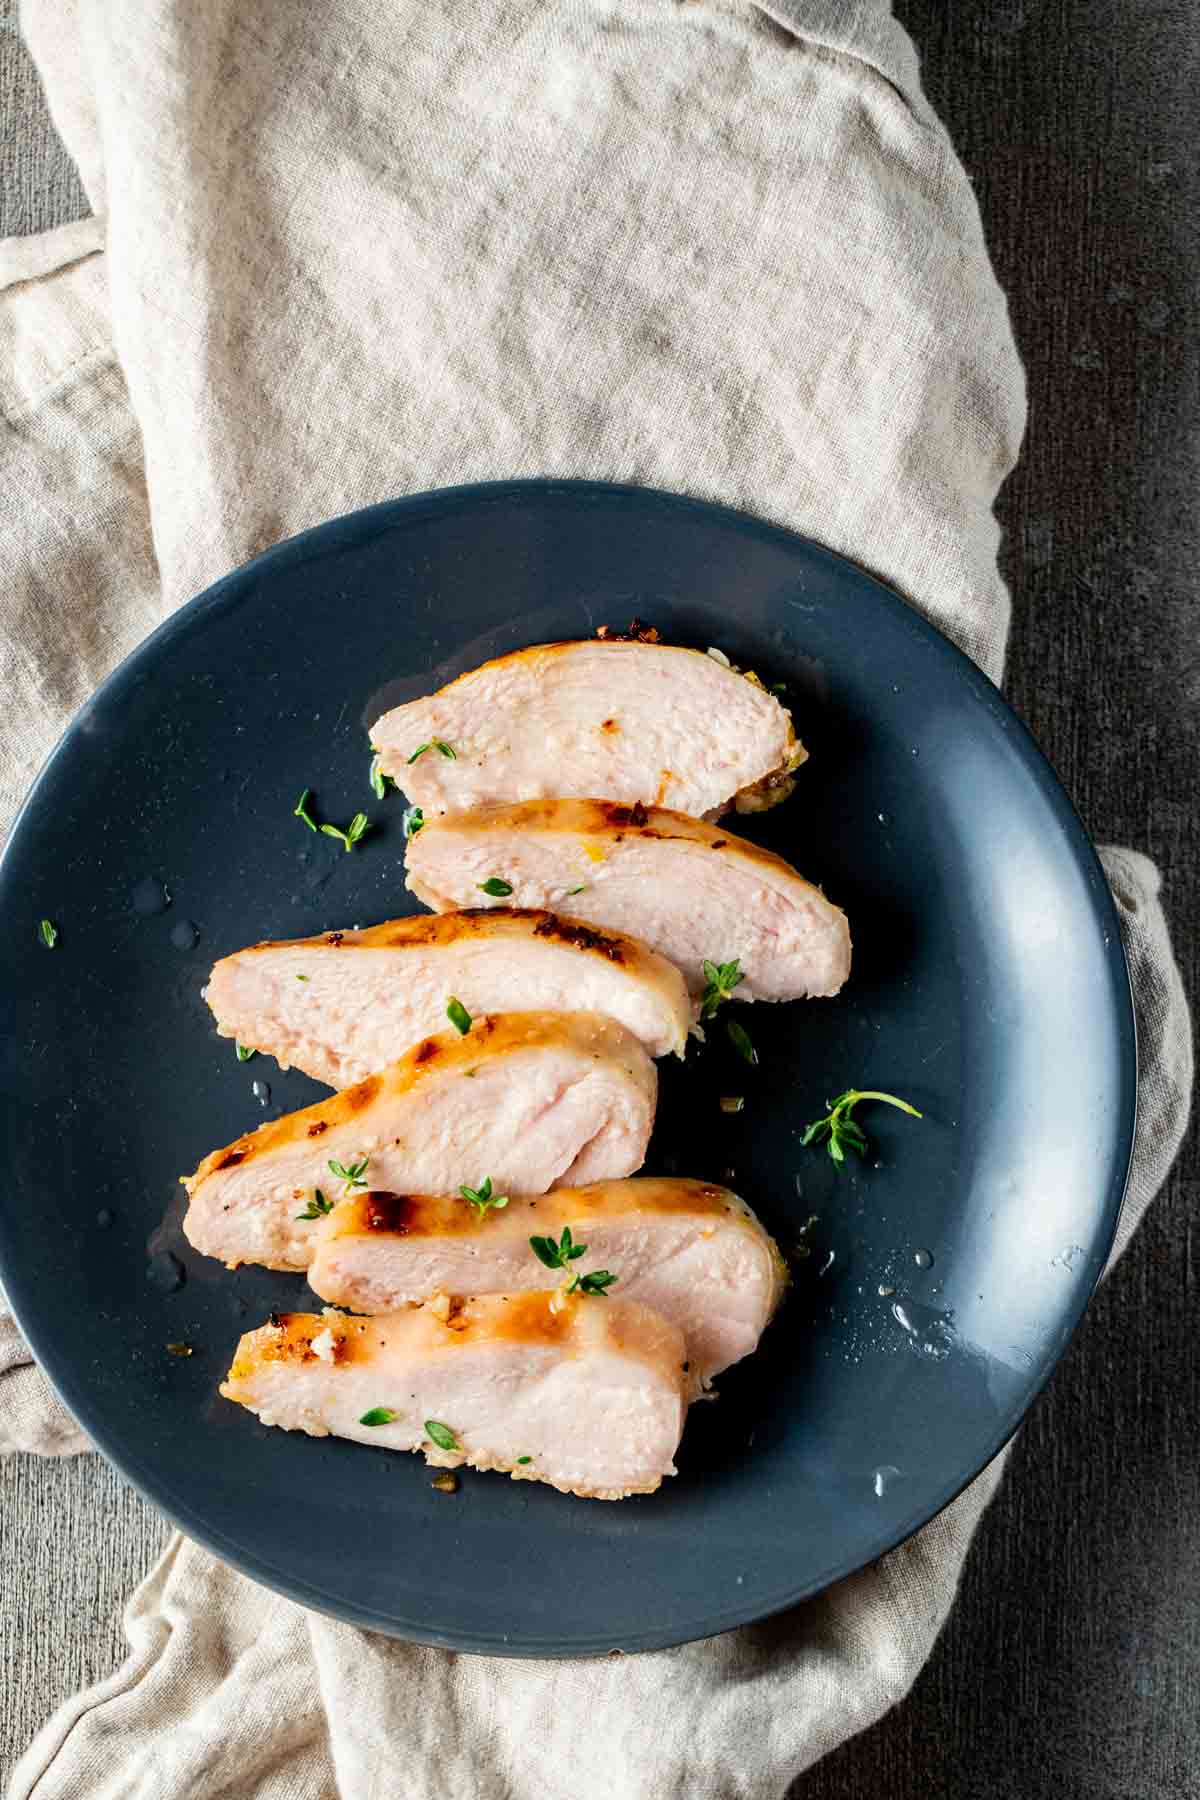 Overhead view of sliced chicken breast on a blue plate on top of a beige napkin.